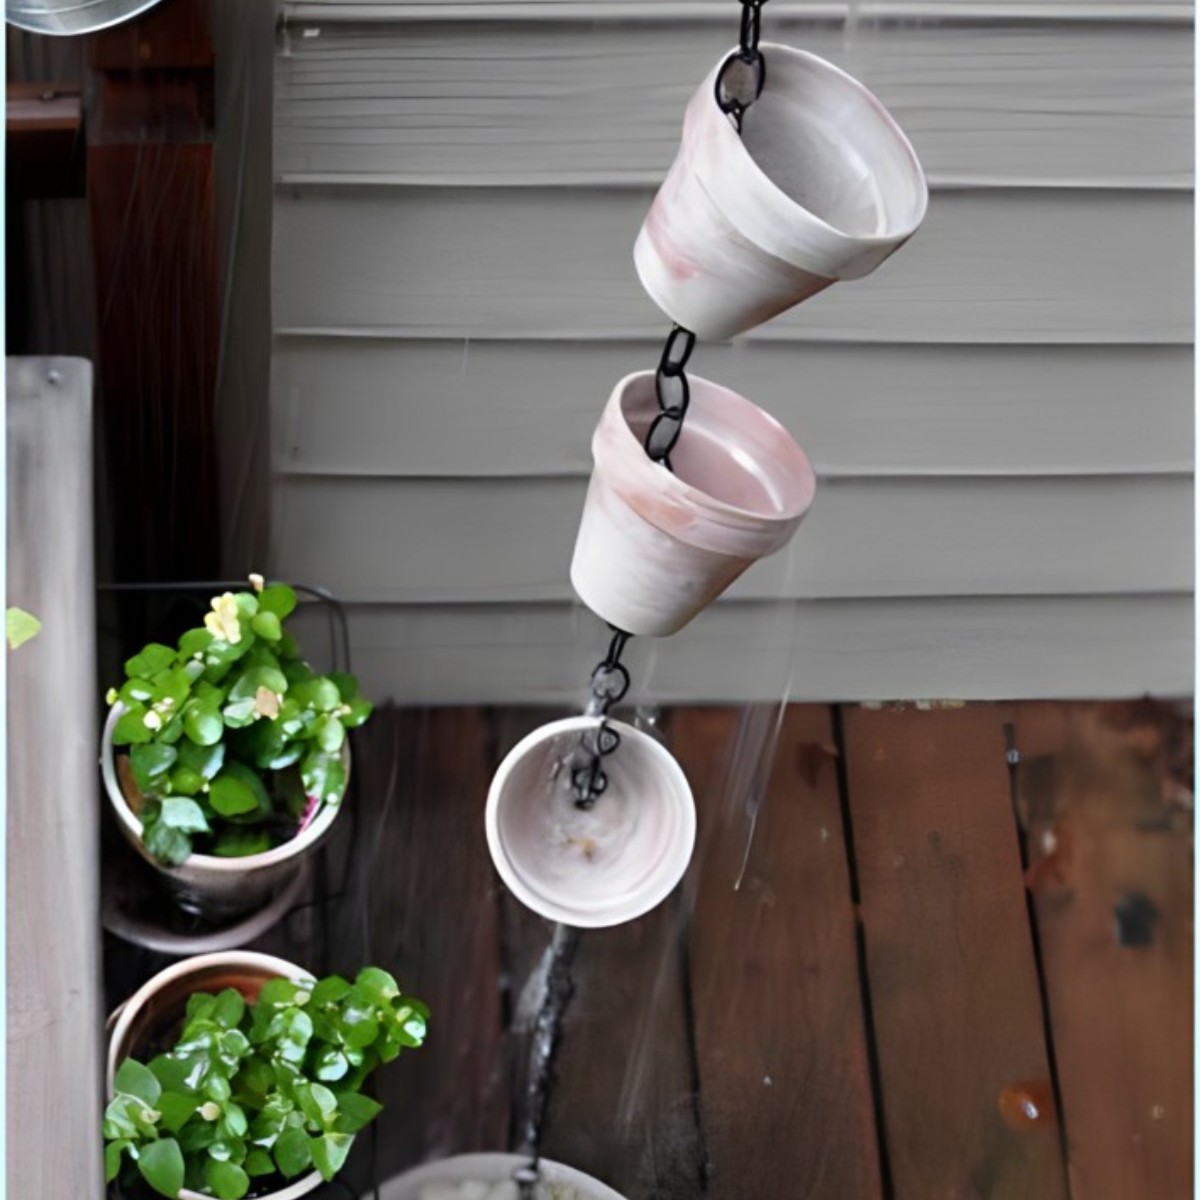 How To DIY Rain Chain With Terra Cotta Pots!